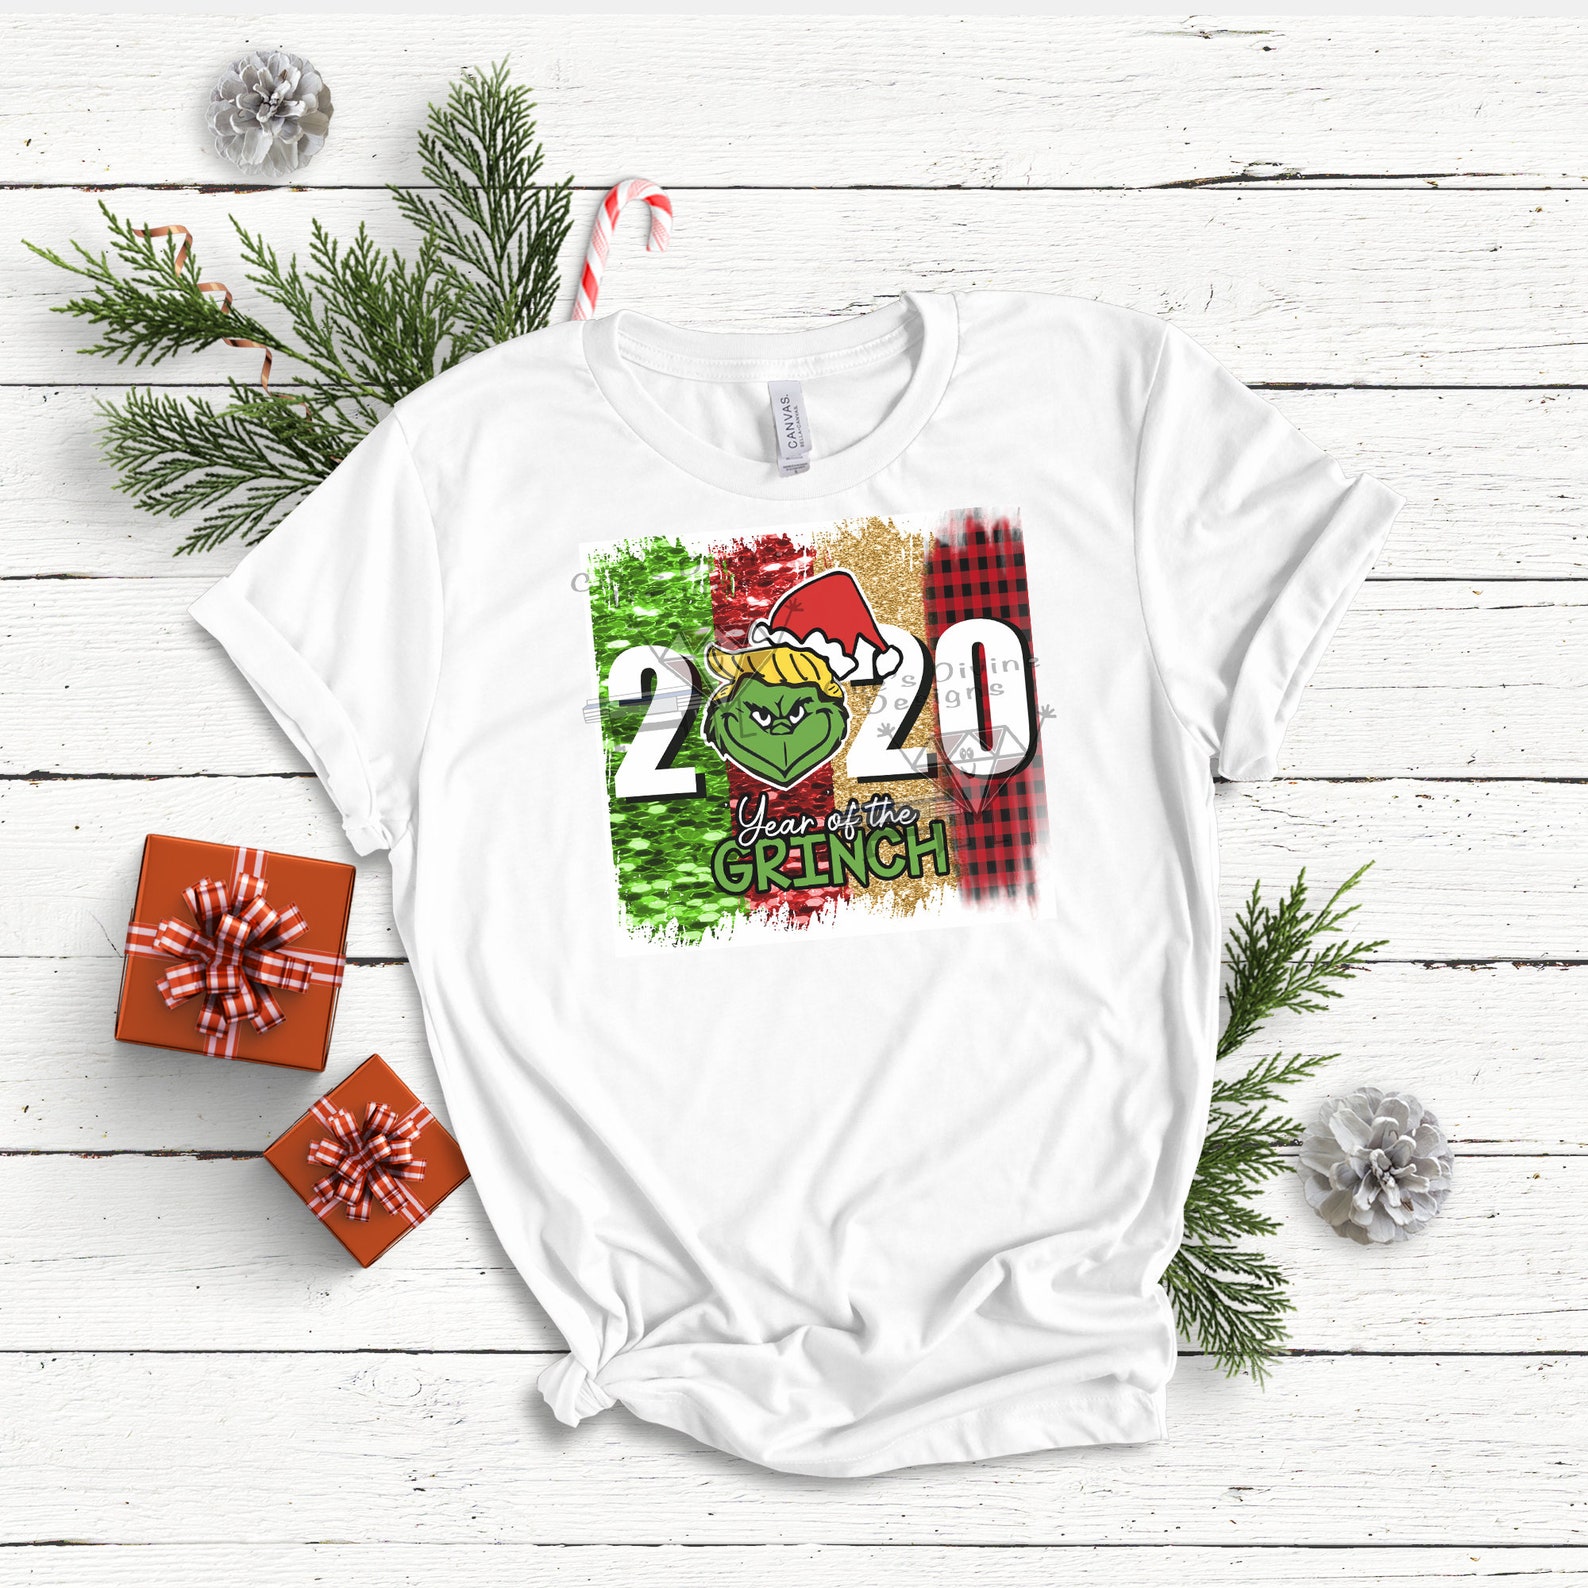 2020 Year of the Grinch ready to press sublimation transfer | Etsy